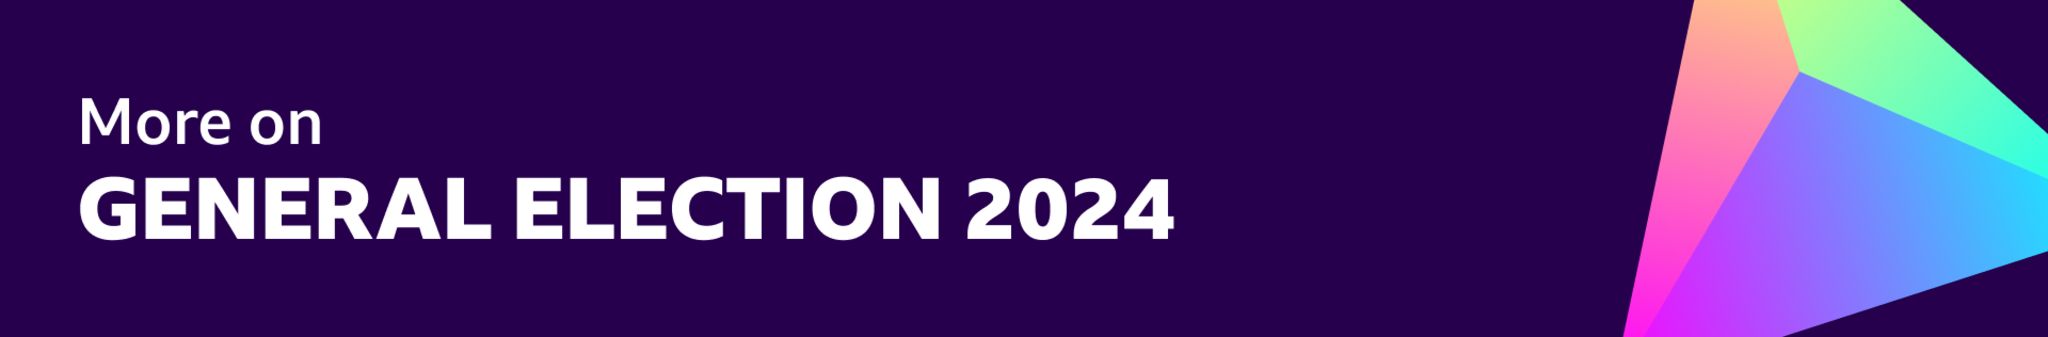 A branded image saying more on general election 2024